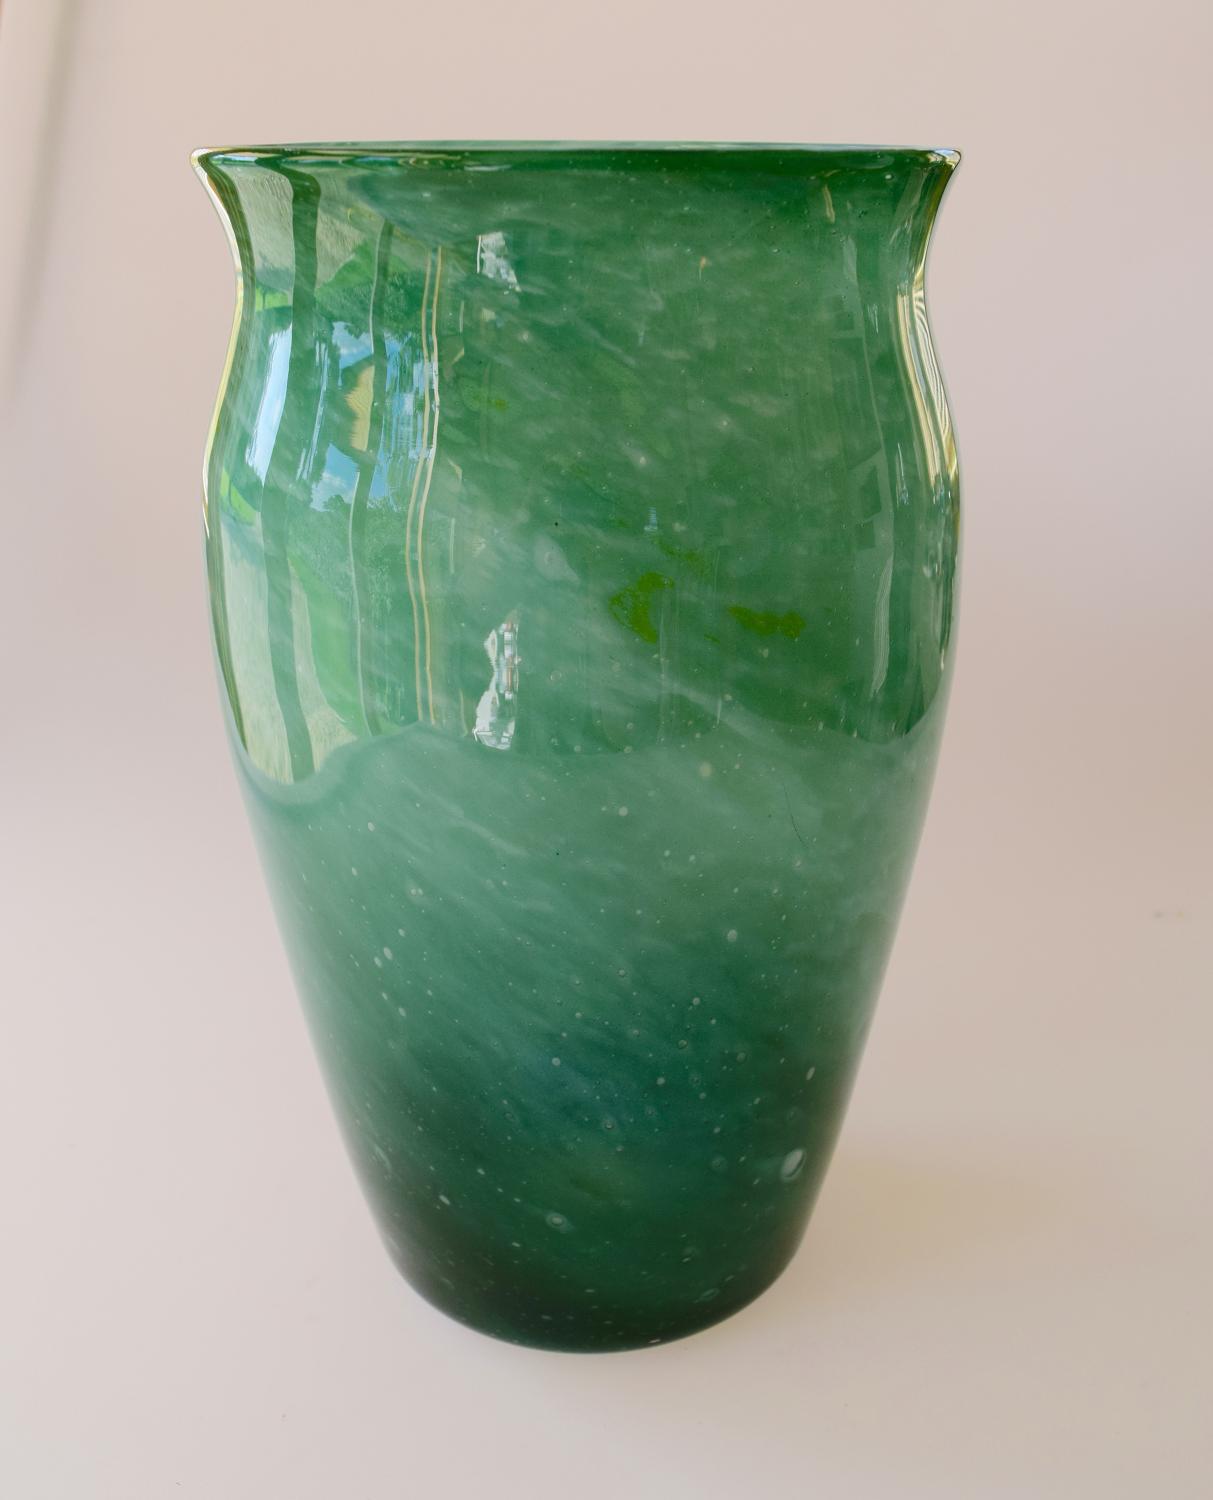 Cloudy blue/green vase, Whitefriars